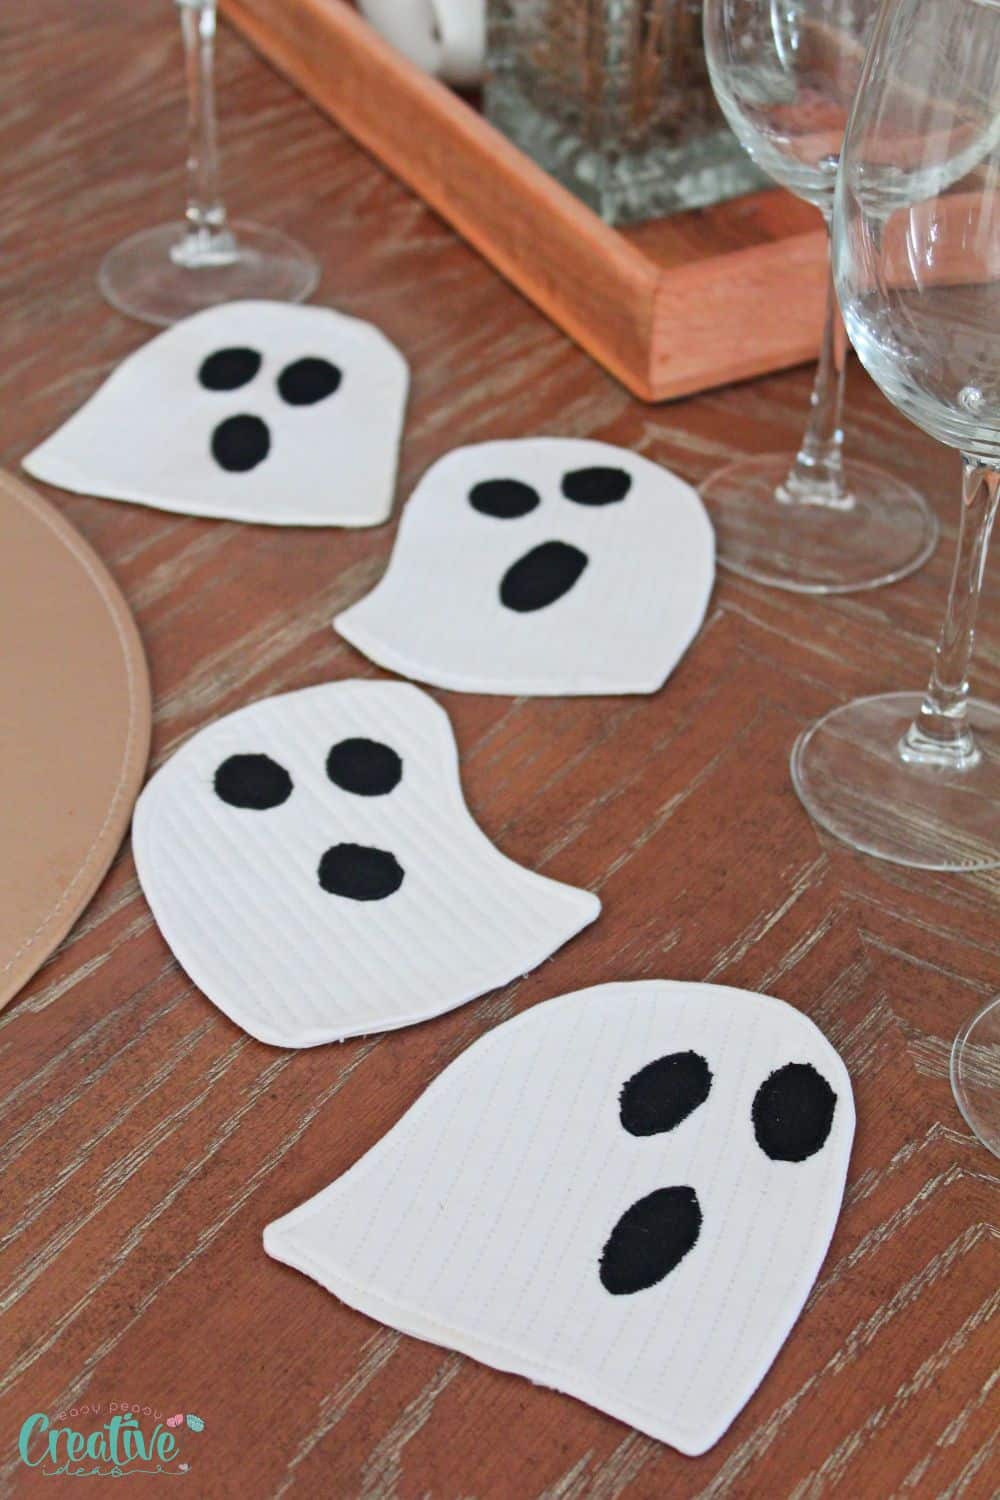 Ghost coasters sewing pattern